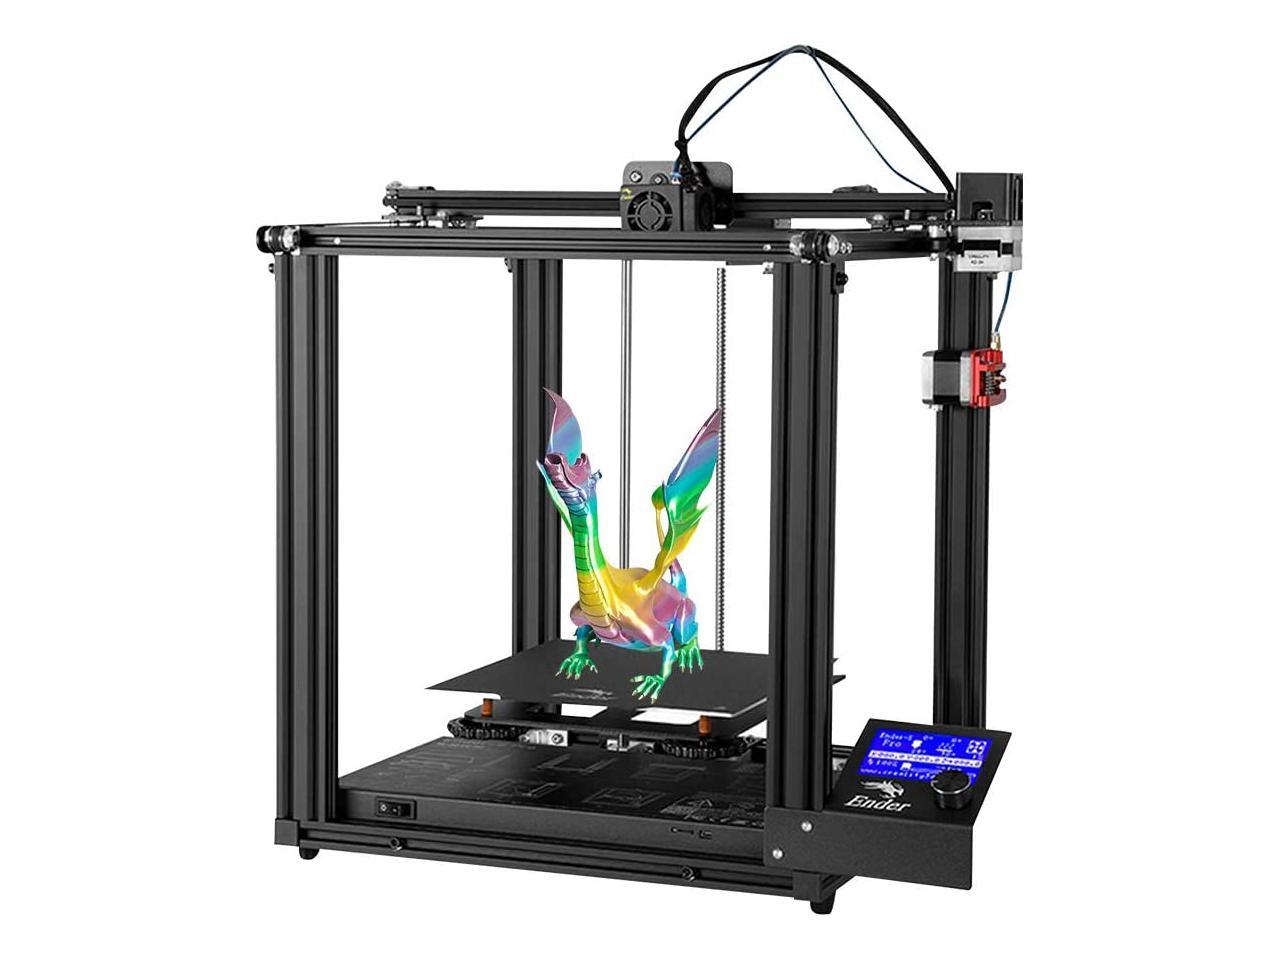 Creality Official Ender 5 Pro 3D Printer Upgrade Silent Mother Board Metal Feeder Extruder and Capricorn Bowden PTFE Tubing 220 x 220 x 300mm Build Volume